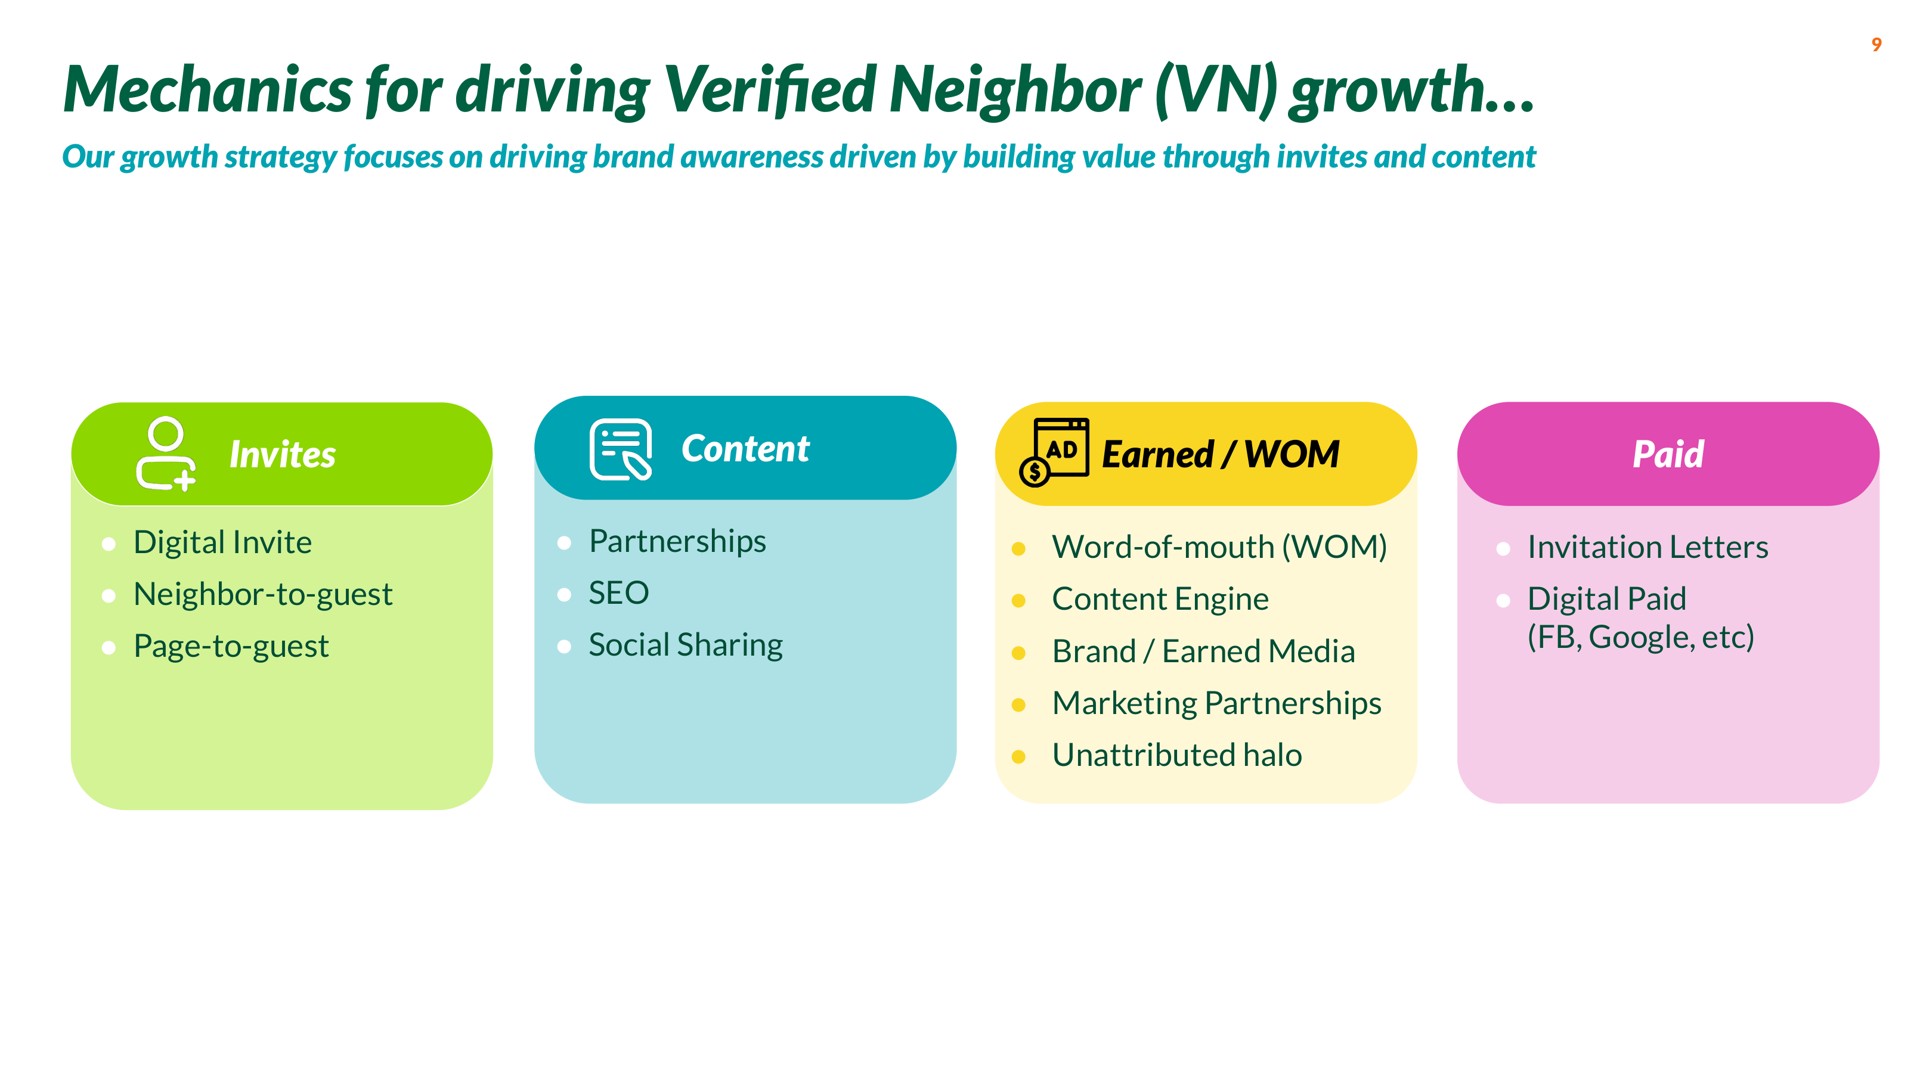 mechanics for driving veri neighbor growth our growth strategy focuses on driving brand awareness driven by building value through invites and content invites content earned paid digital invite partnerships neighbor to guest page to guest social sharing word of mouth invitation letters content engine brand earned media marketing partnerships unattributed halo digital paid verified | Nextdoor